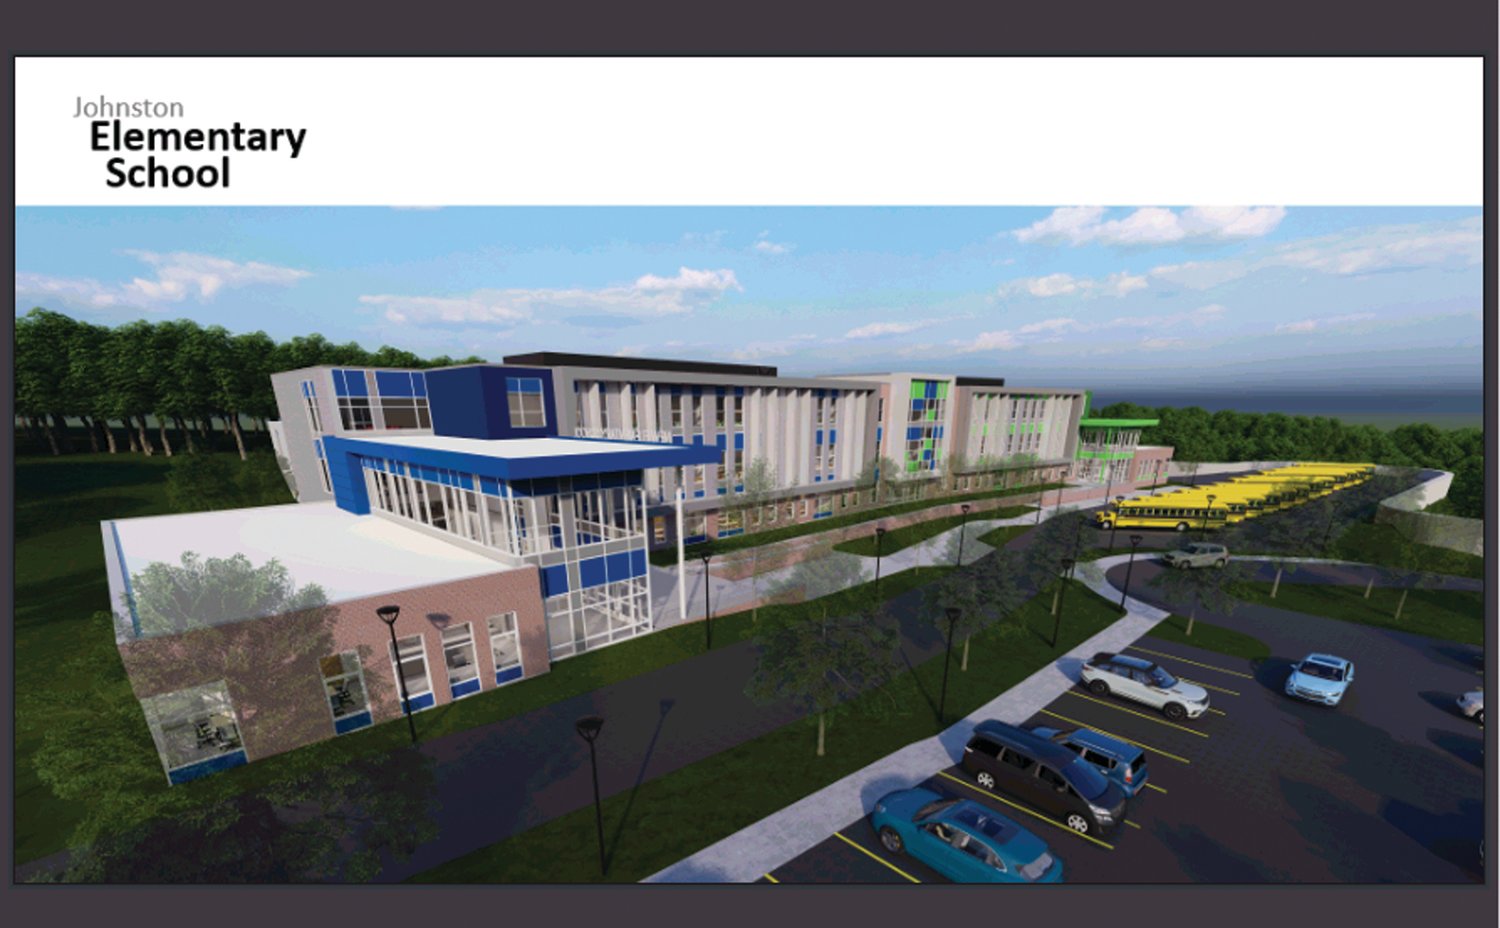 Johnston Elementary School
STATUS: New building
LOCATION: Town property just north of the Johnston High School
STUDENT BODY: 1,100 students in grades 1-4
PRICE TAG: $84,350,000
OPENING DATE: Tentatively scheduled to open in late summer 2024.